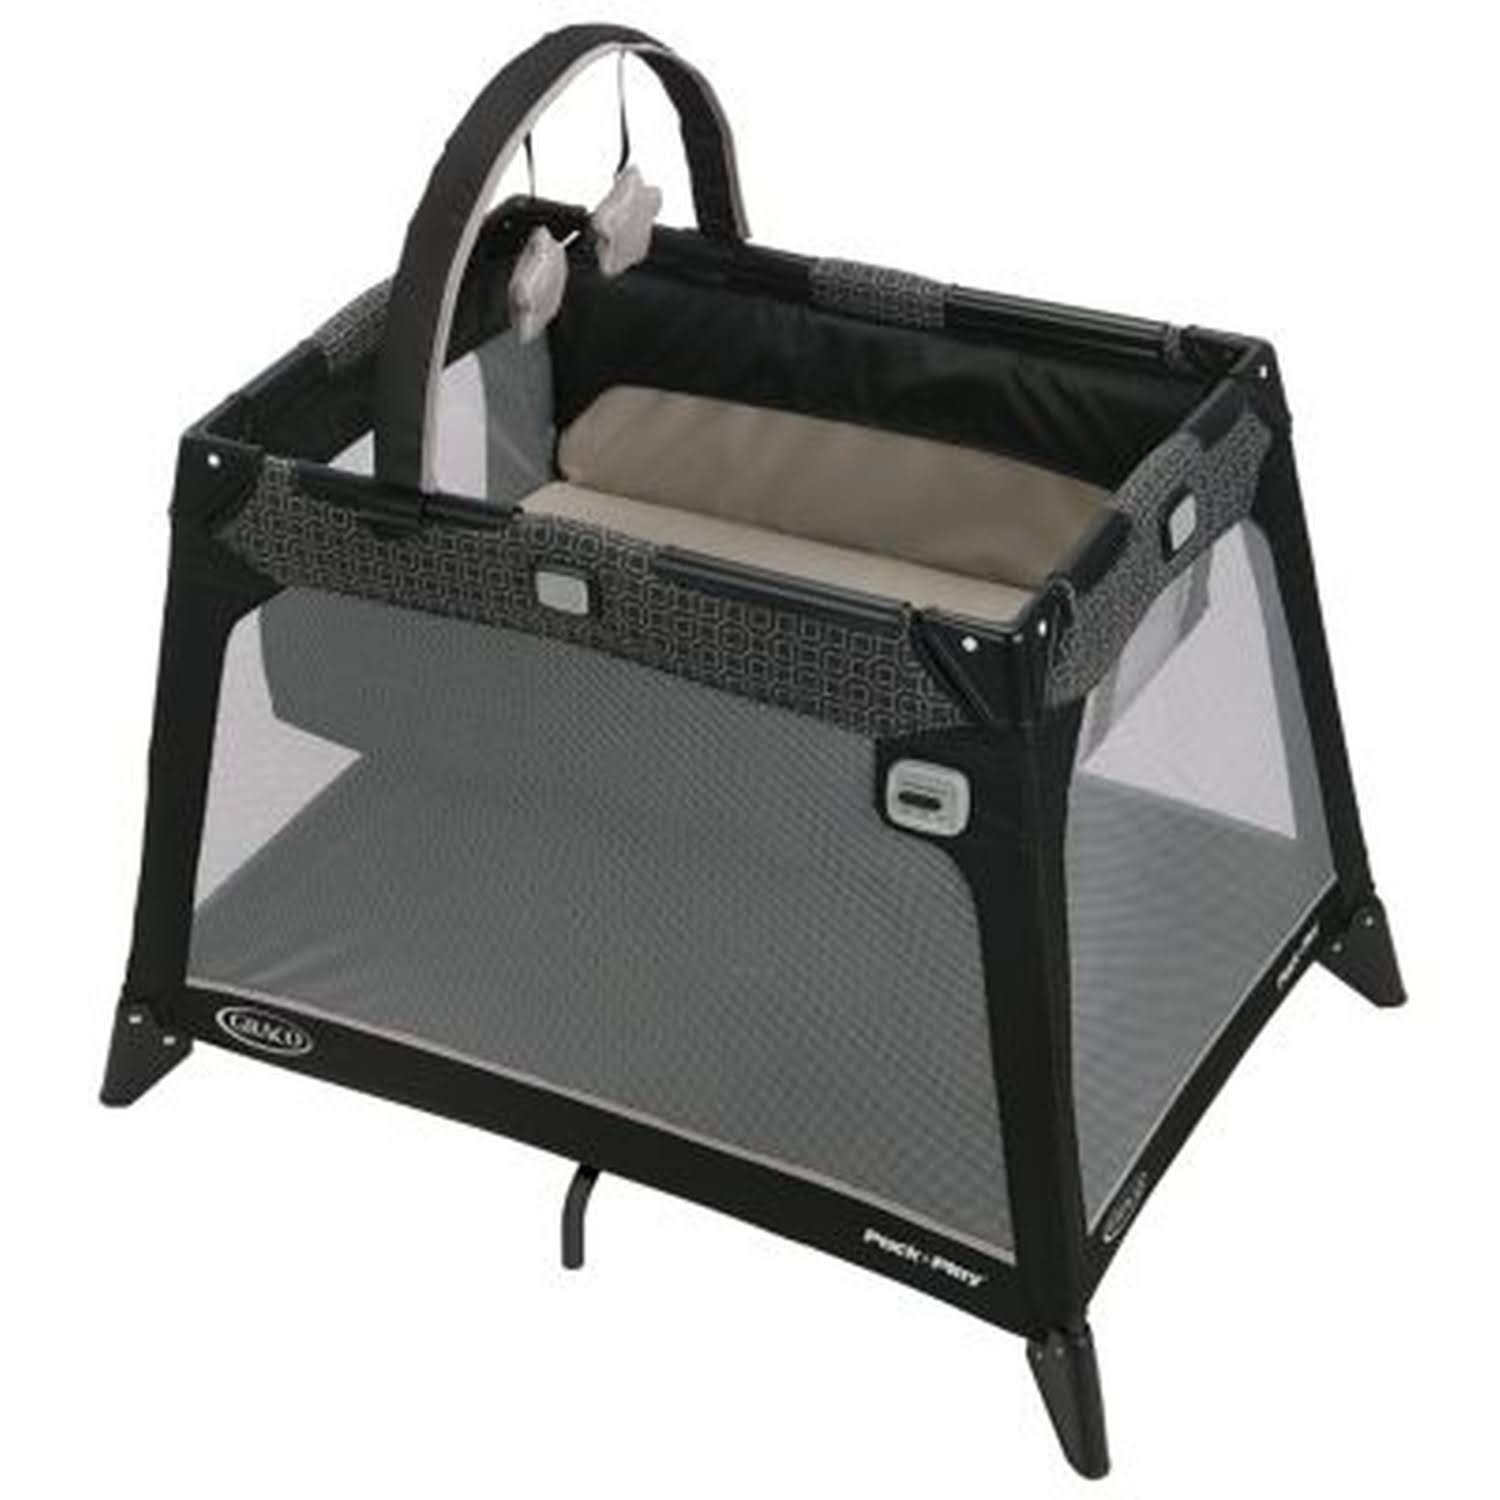 graco pack and play nimble nook